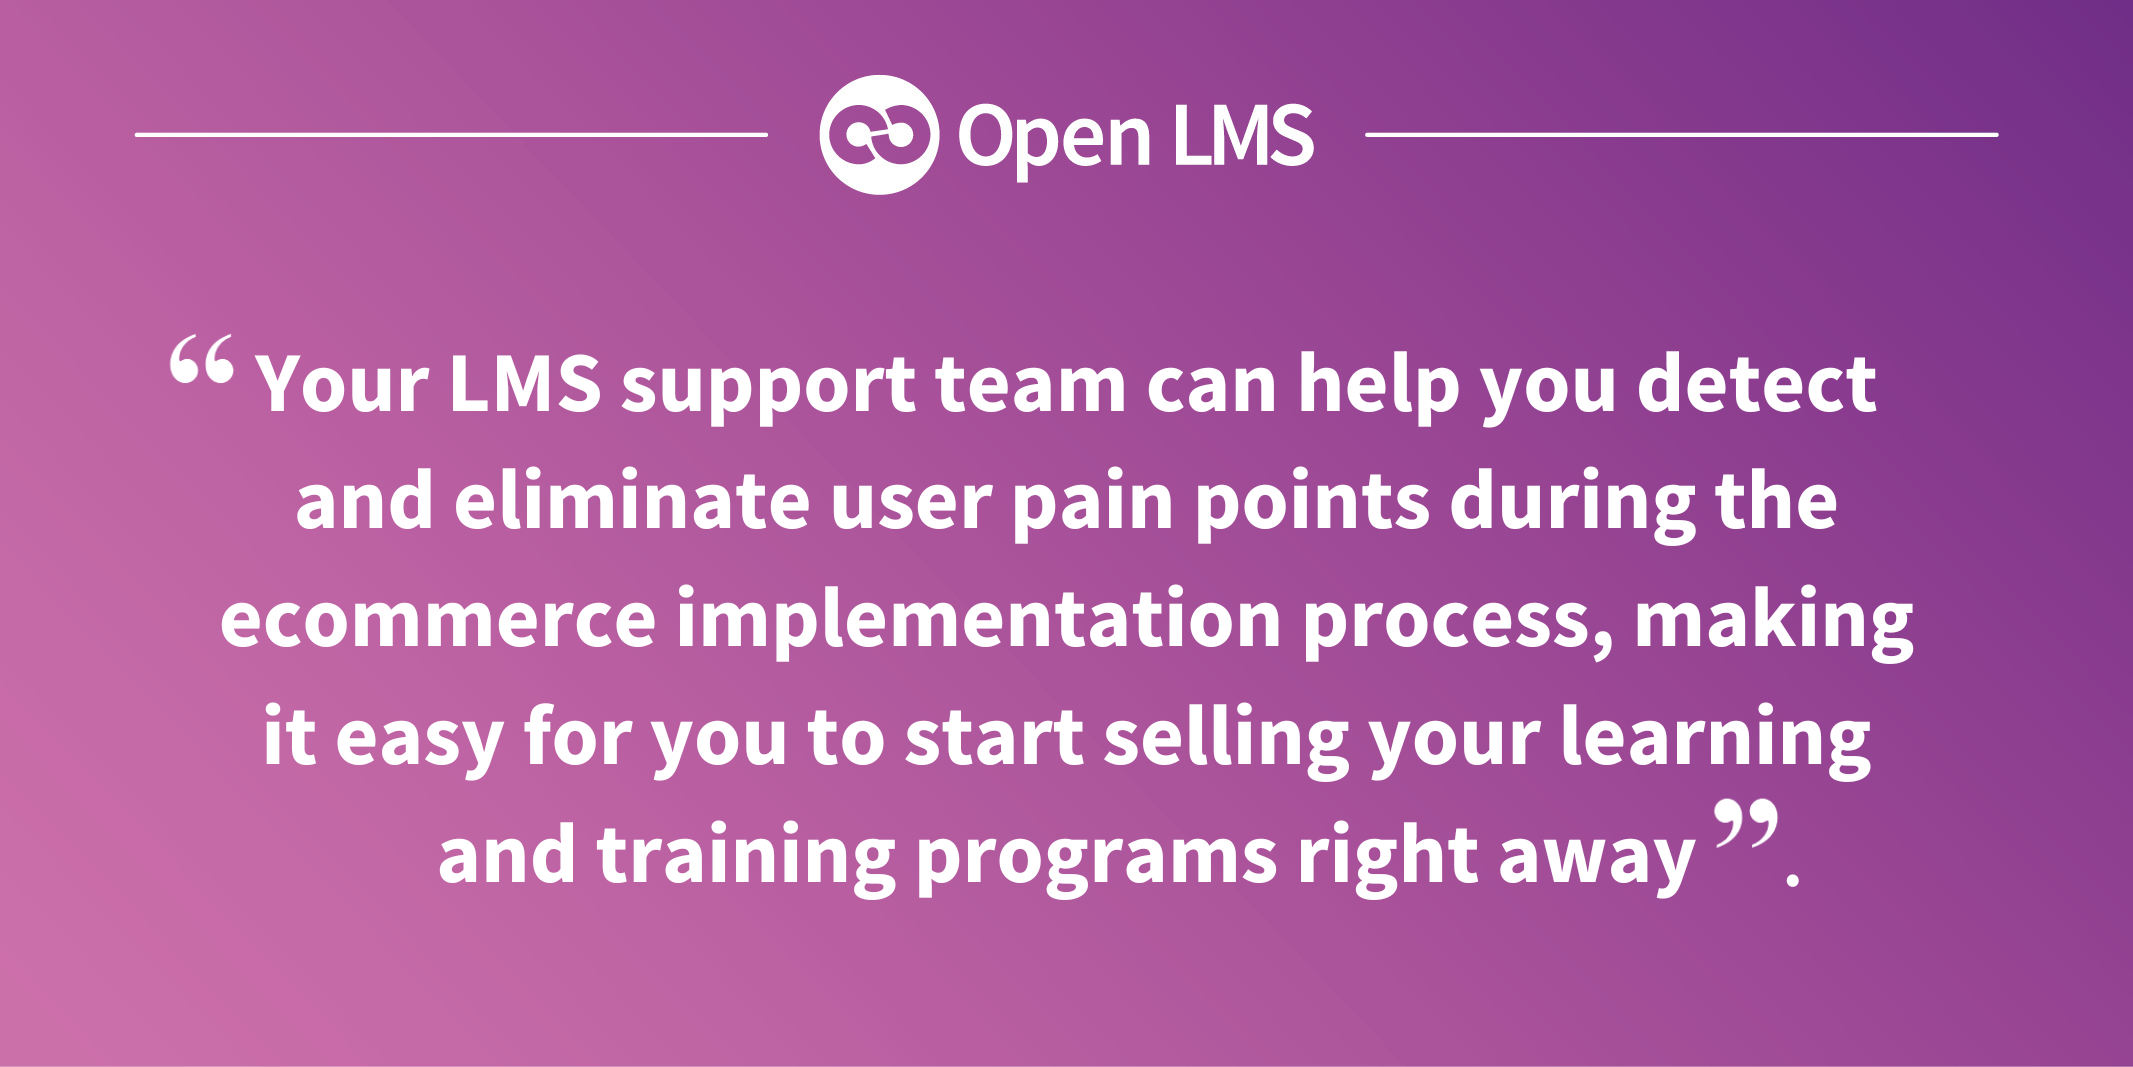 Your LMS support team can help you detect and eliminate user pain points during the ecommerce implementation process, making it easy for you to start selling your learning and training programs right away